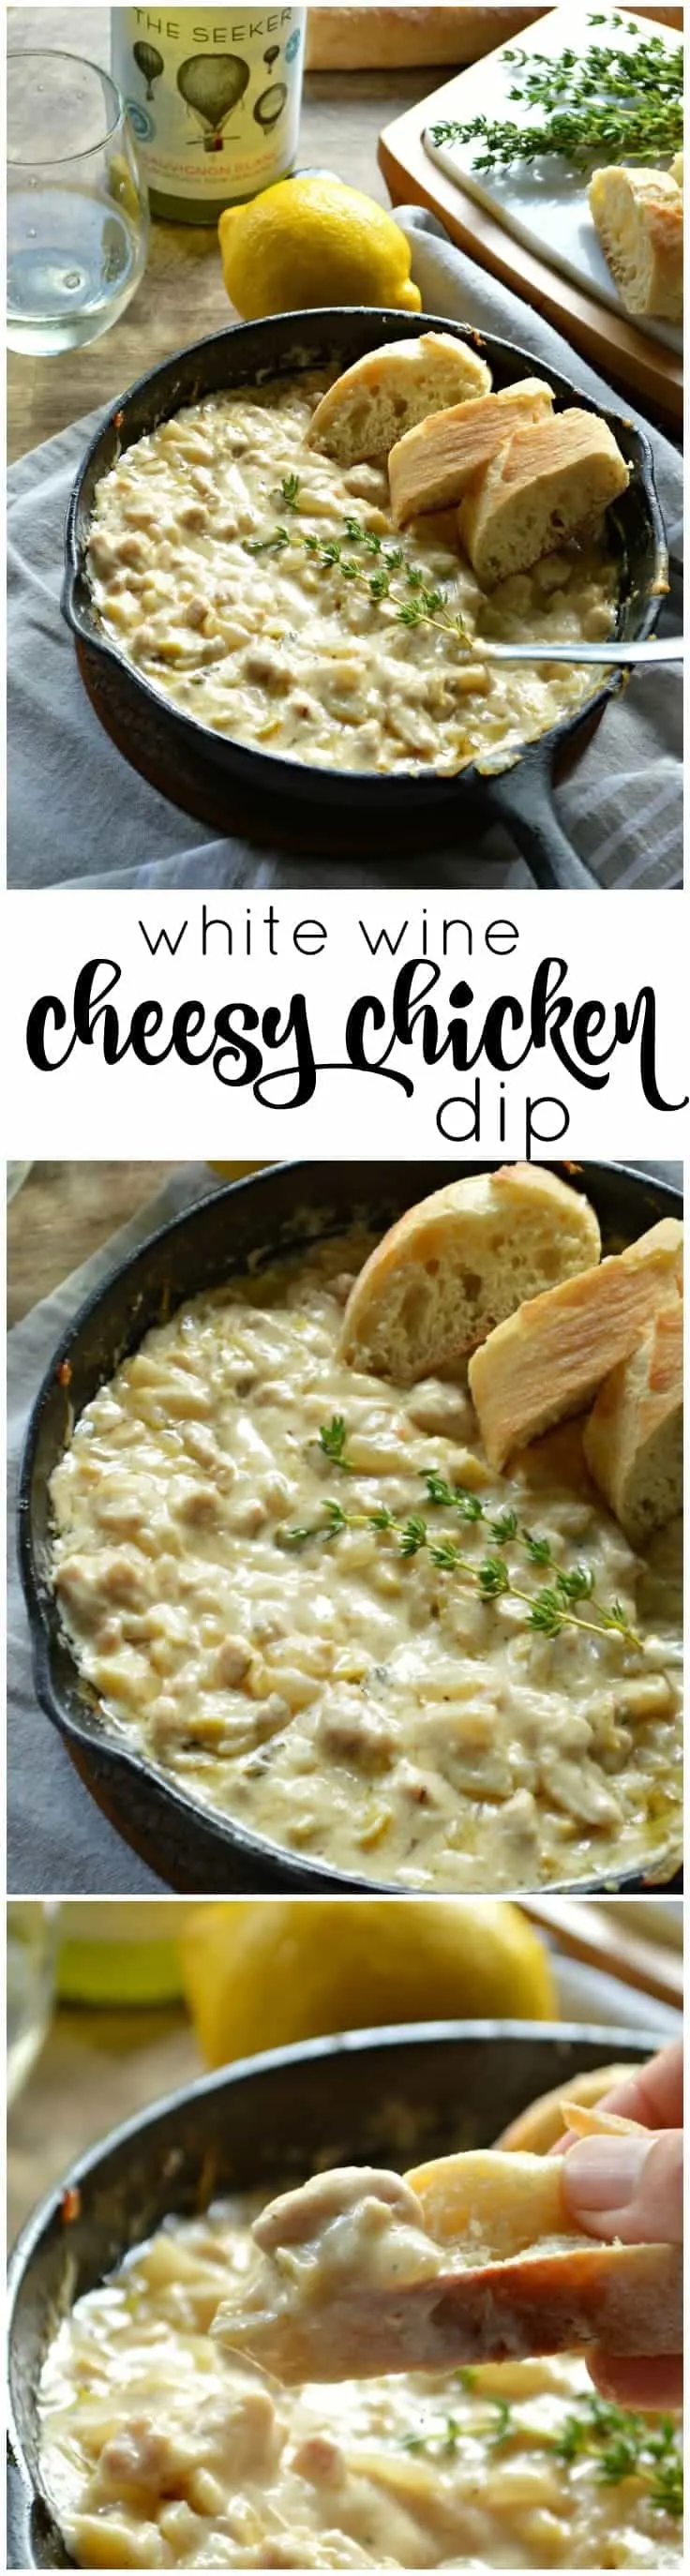 White Wine Cheesy Chicken Dip is perfect for parties! This easy appetizer recipe is loaded with chicken, cheese, fresh herbs, and the zing of white wine.